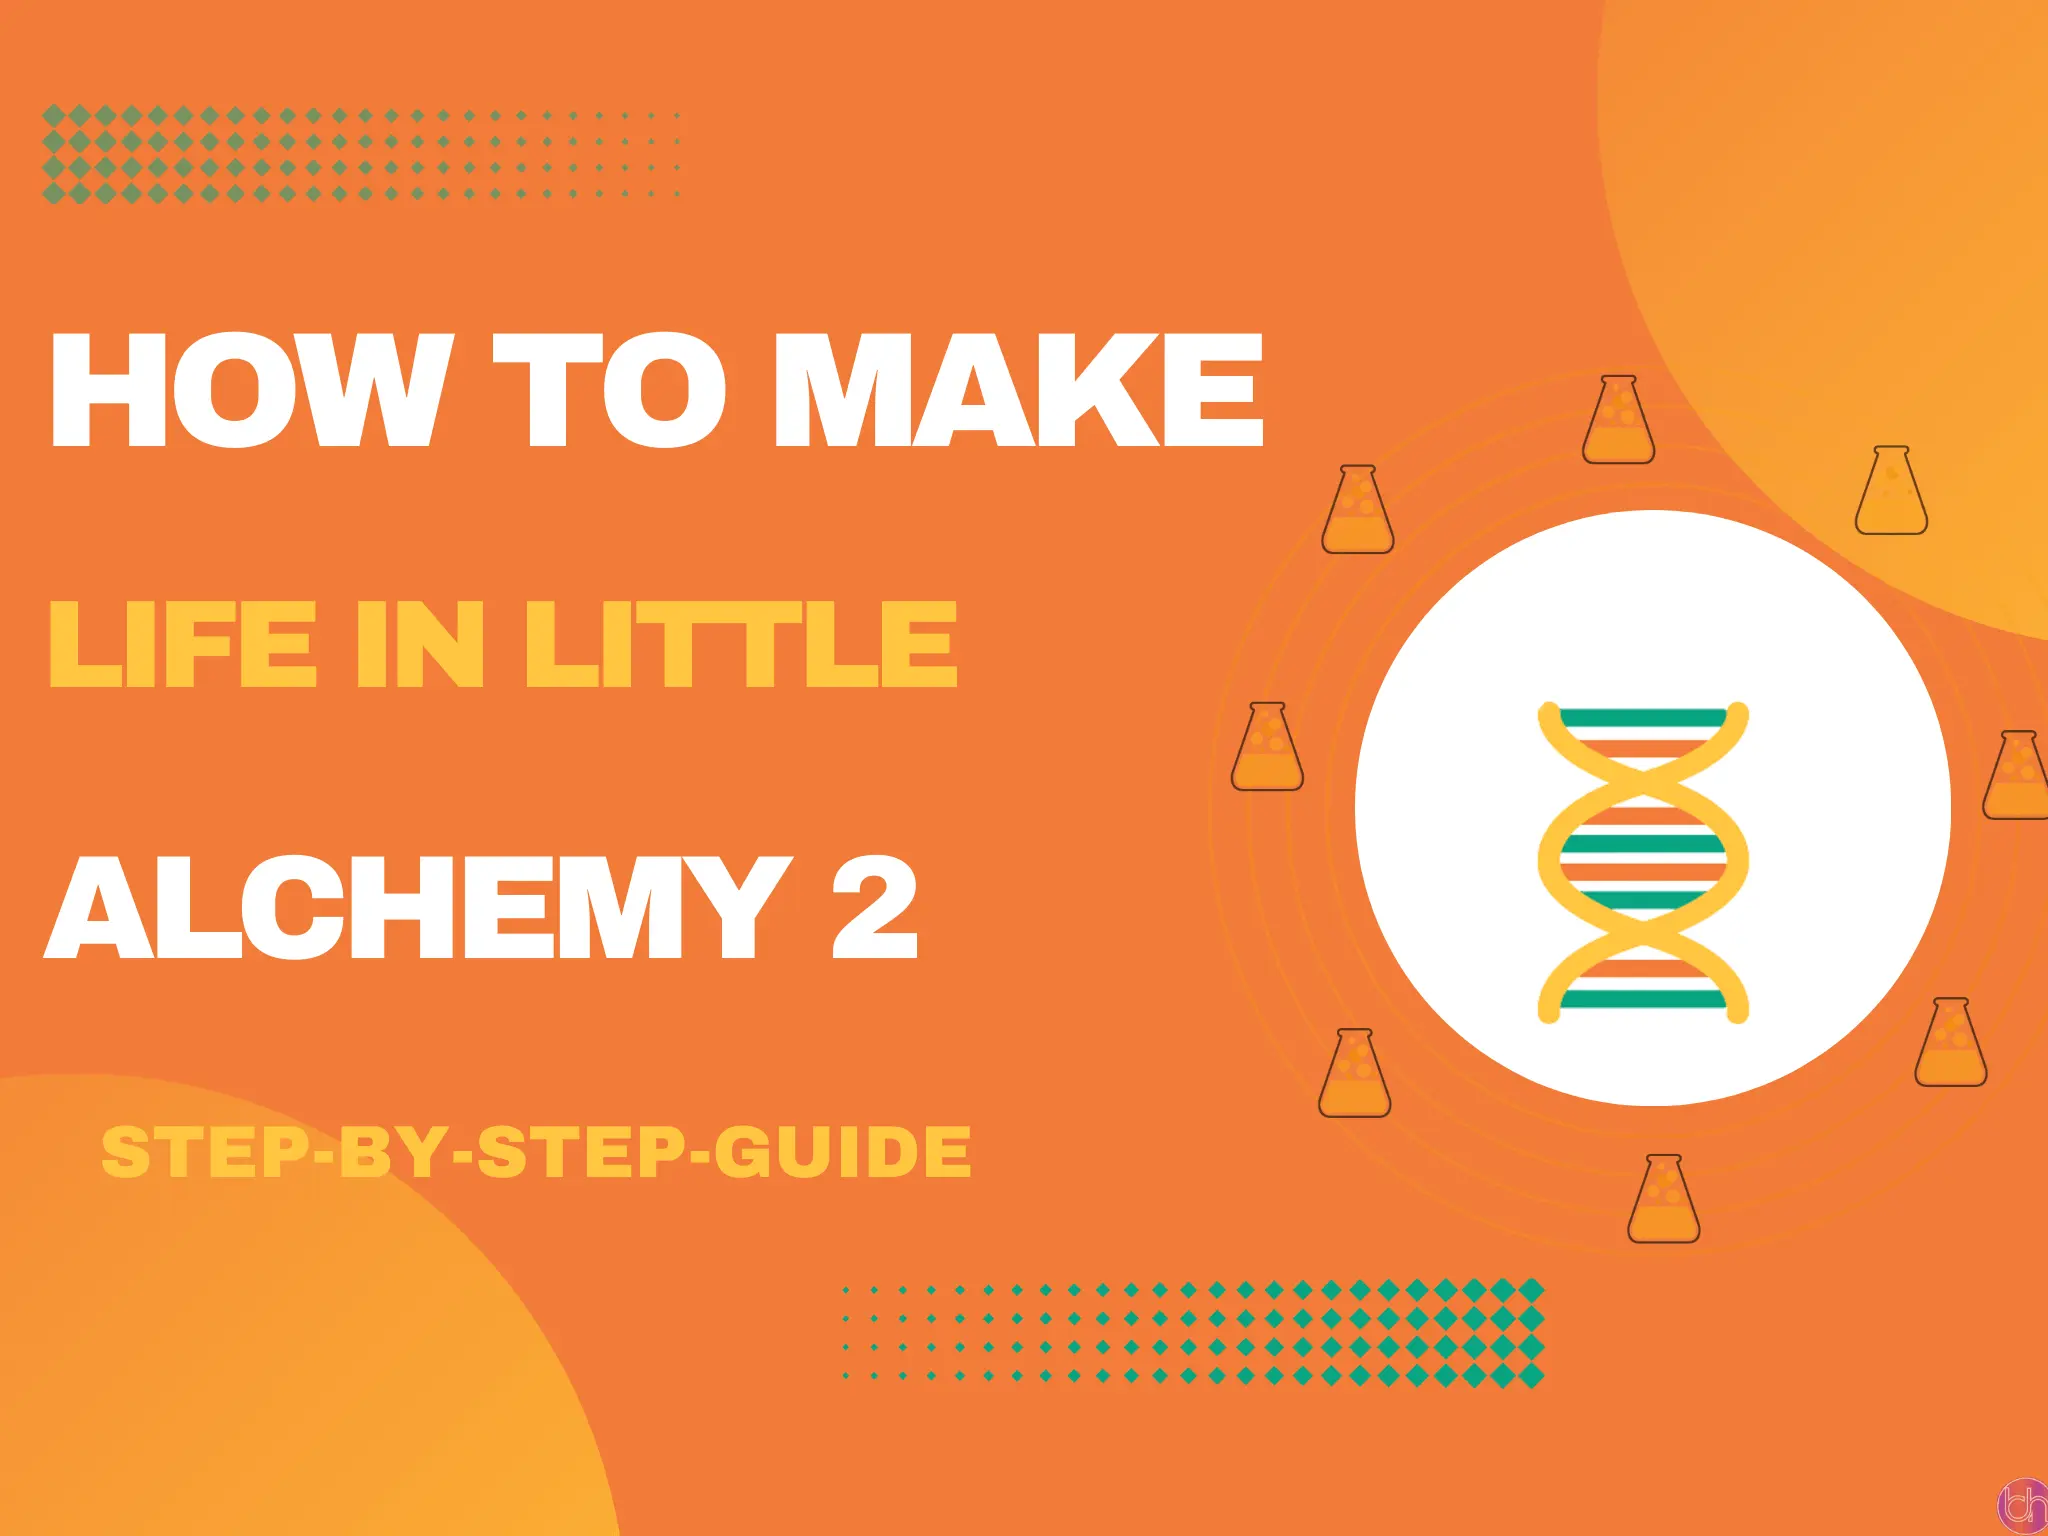 How to make Life in Little Alchemy 2